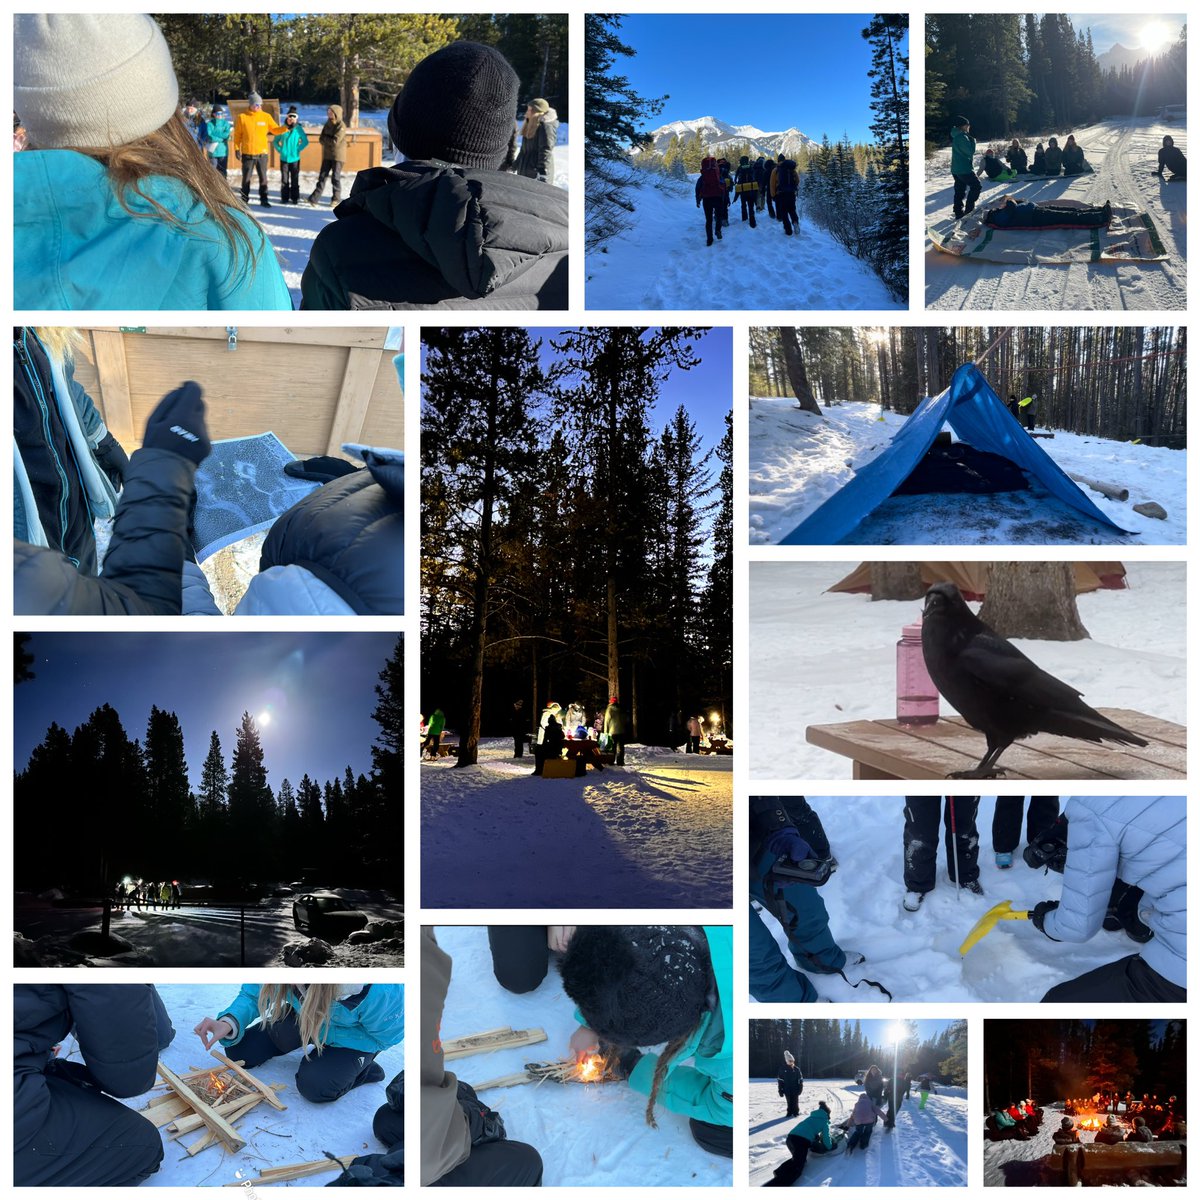 Extremely proud of the amazing Gr 9 ODL students. Another incredible Winter Survival Camp. Not everyone gets to experience the great outdoors in -12 w/only a tarp! Learning avalanche skills, survival first-aid & more! #outdoorleadership @yyCBEdu @albertateachers @takemeoutside